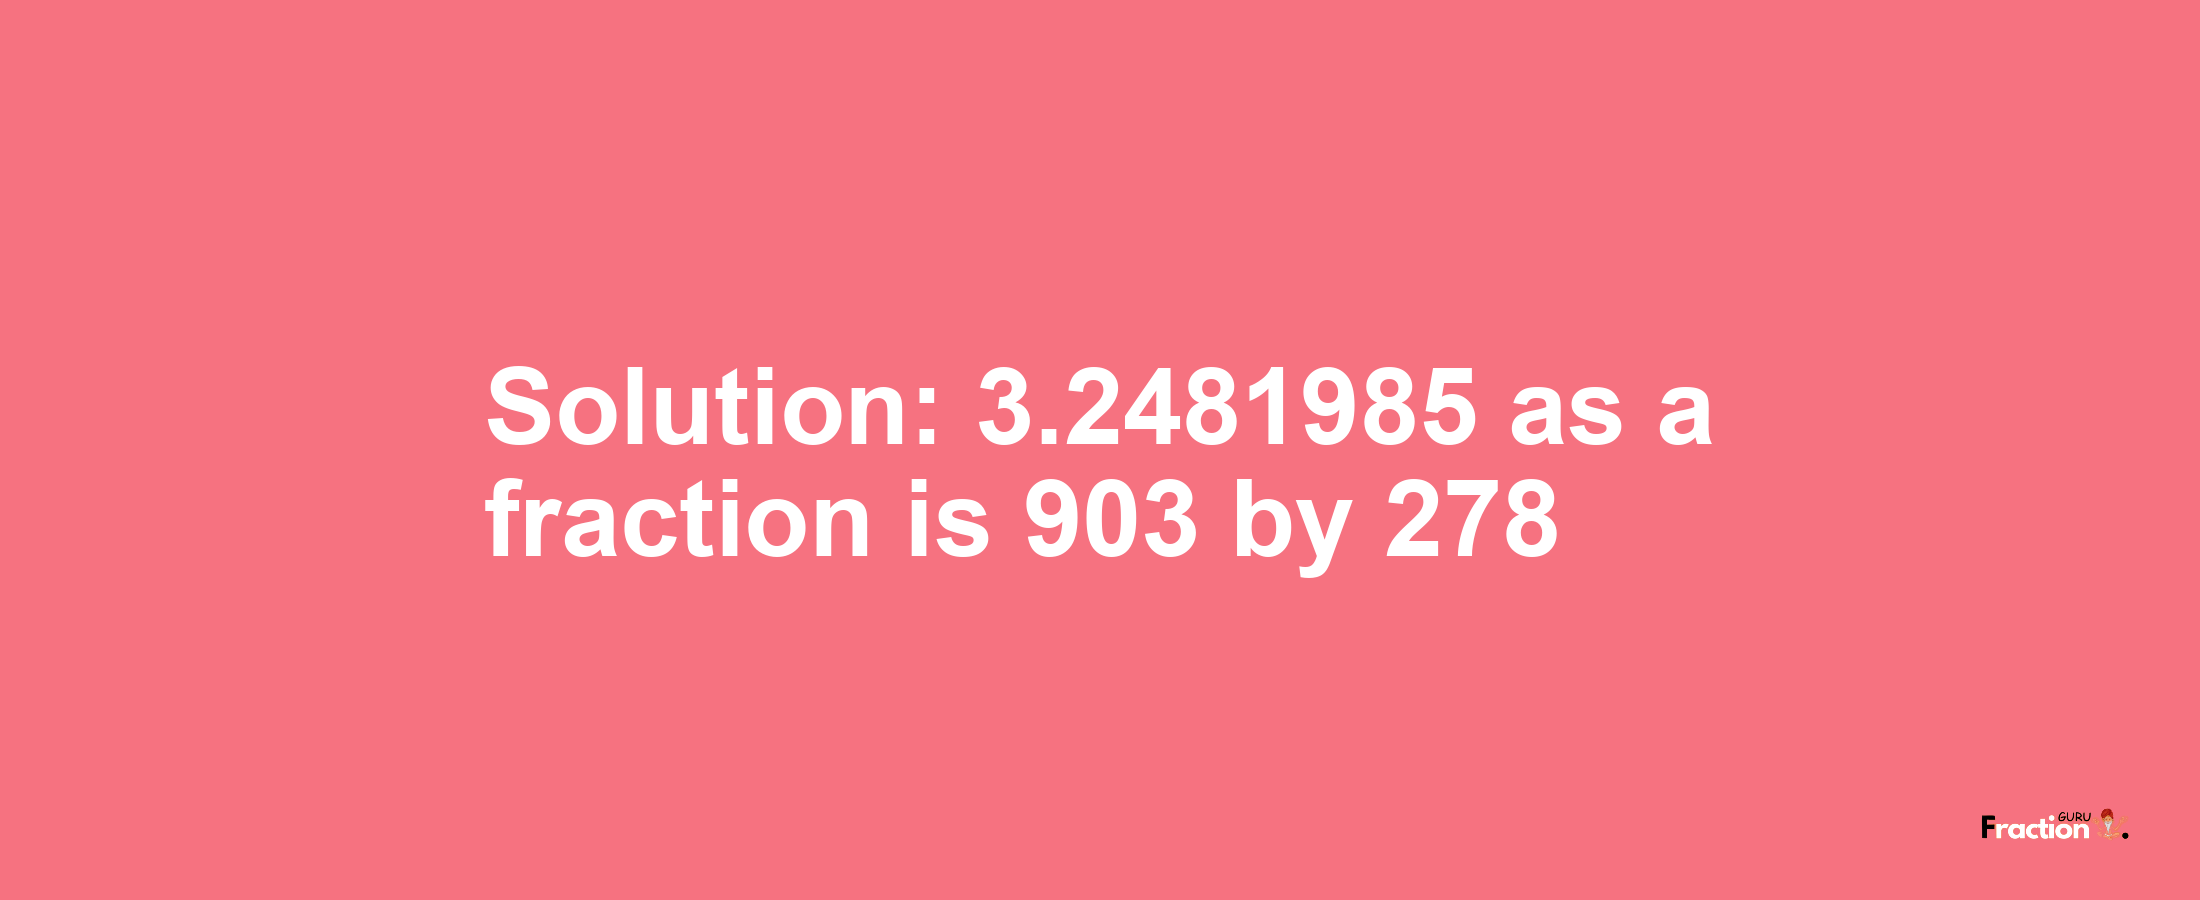 Solution:3.2481985 as a fraction is 903/278